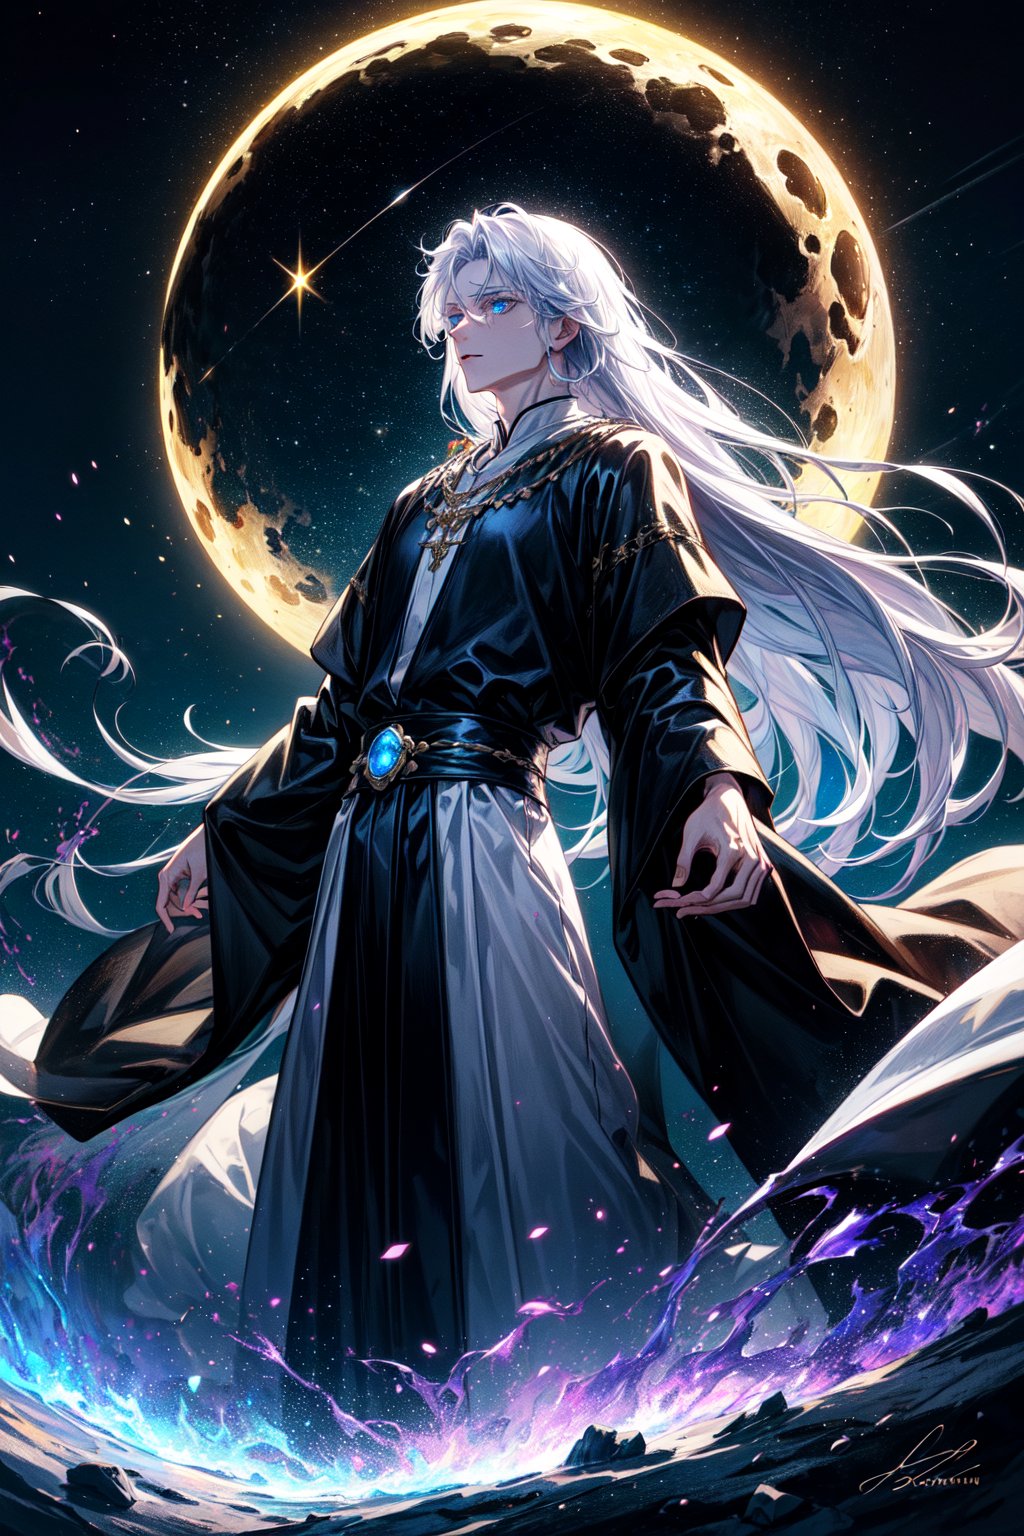 A young sorcerer stands against a darkened backdrop, illuminated by soft, lunar hues. His long, silver hair flows like moonlight on a starry night, framing his enigmatic features. Intense blue eyes gleam with wisdom as he gazes into the distance. A black robe with intricate, shimmering constellations adorns his figure, while a delicate necklace featuring a radiant moonstone amplifies his magical connection. The overall atmosphere is mystical and ethereal, with an air of ancient wisdom.